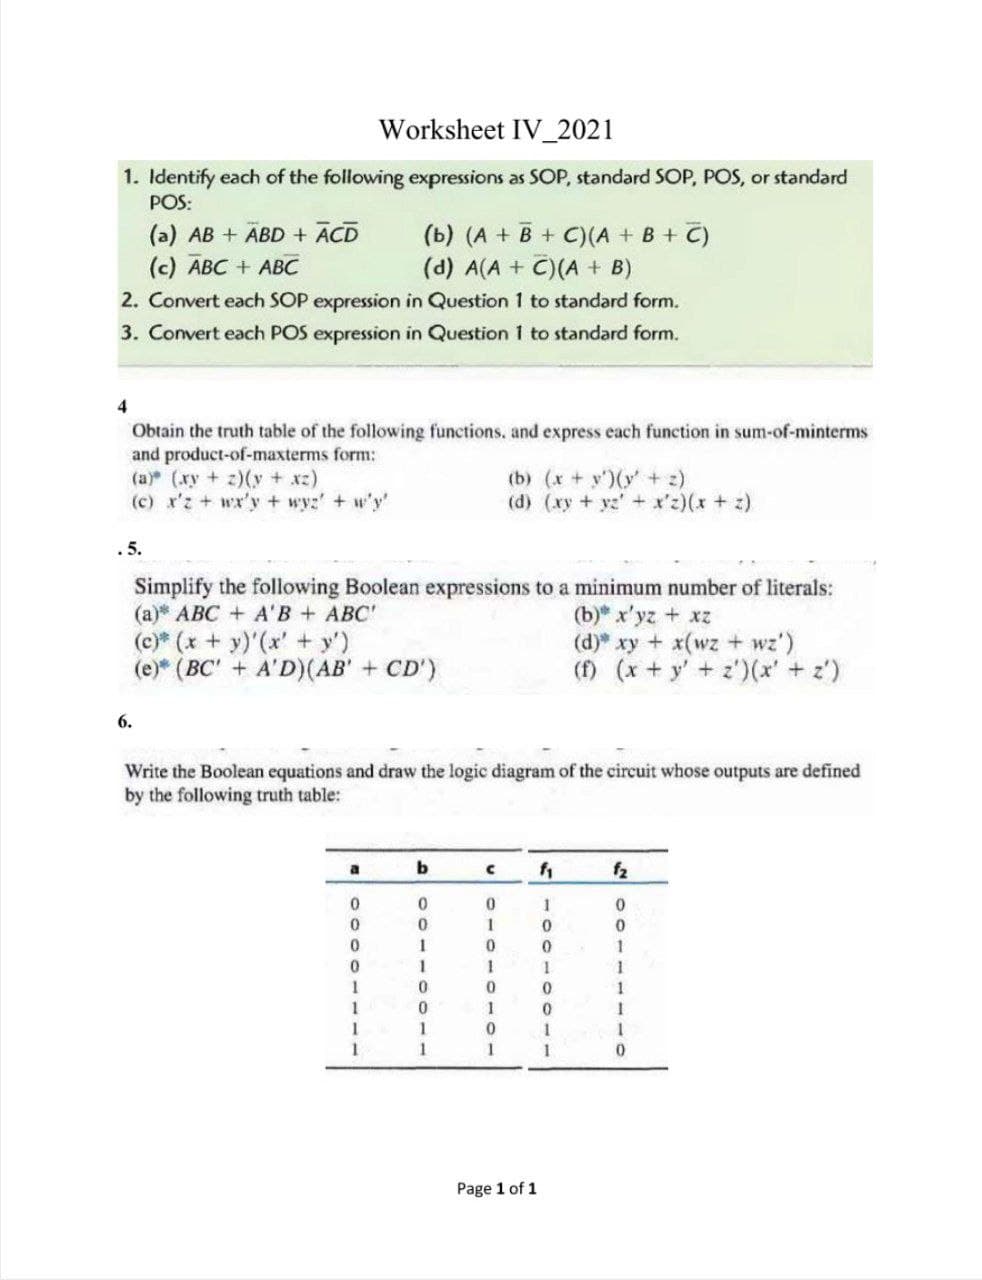 Worksheet IV_2021
1. Identify each of the following expressions as SOP, standard SOP, POS, or standard
POS:
(a) AB + ABD + ĀCD
(c) ABC + ABC
(b) (A + B + C)(A + B + C)
(d) A(A + C)(A + B)
2. Convert each SOP expression in Question 1 to standard form.
3. Convert each POS expression in Question 1 to standard form.
4
Obtain the truth table of the following functions, and express each function in sum-of-minterms
and product-of-maxterms form:
(a) (xy +z)(y + xz)
(c) x'z + wx'y + wyz' + w'y'
(b) (x + y')(y' + 2)
(d) (xy + yz + x'z)(x + z)
.5.
Simplify the following Boolean expressions to a minimum number of literals:
(а)* АВС + А'В + АВС
(c)* (x + y)'(x' + y')
(e)* (BC' + A'D)(AB' + CD')
(b) x'yz + xz
(d) xy + x(wz + wz')
(f) (x + y' + z')(x'+ z')
6.
Write the Boolean equations and draw the logic diagram of the circuit whose outputs are defined
by the following truth table:
a
f2
1
1
1
1
1
1
1
1
1
1
1
Page 1 of 1
